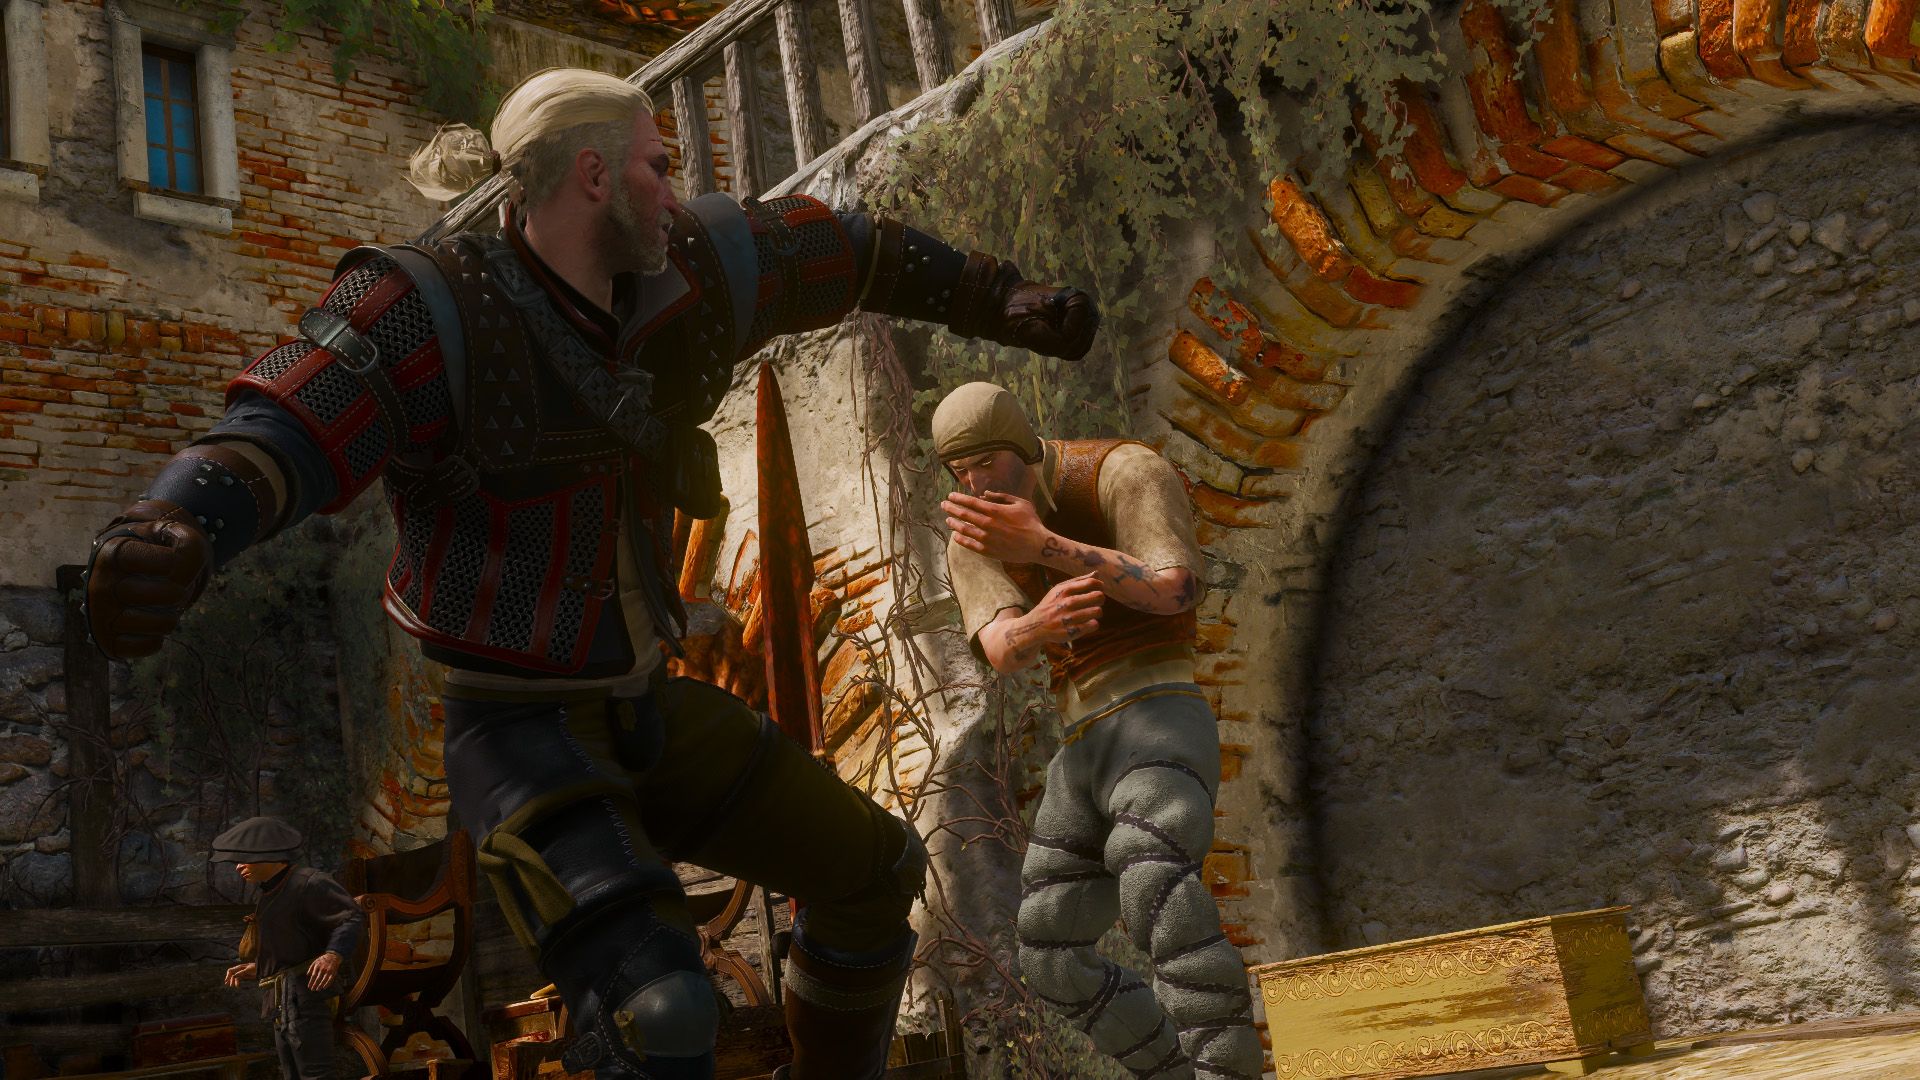 Geralt swings his arm back, ready to punch the man in the face.